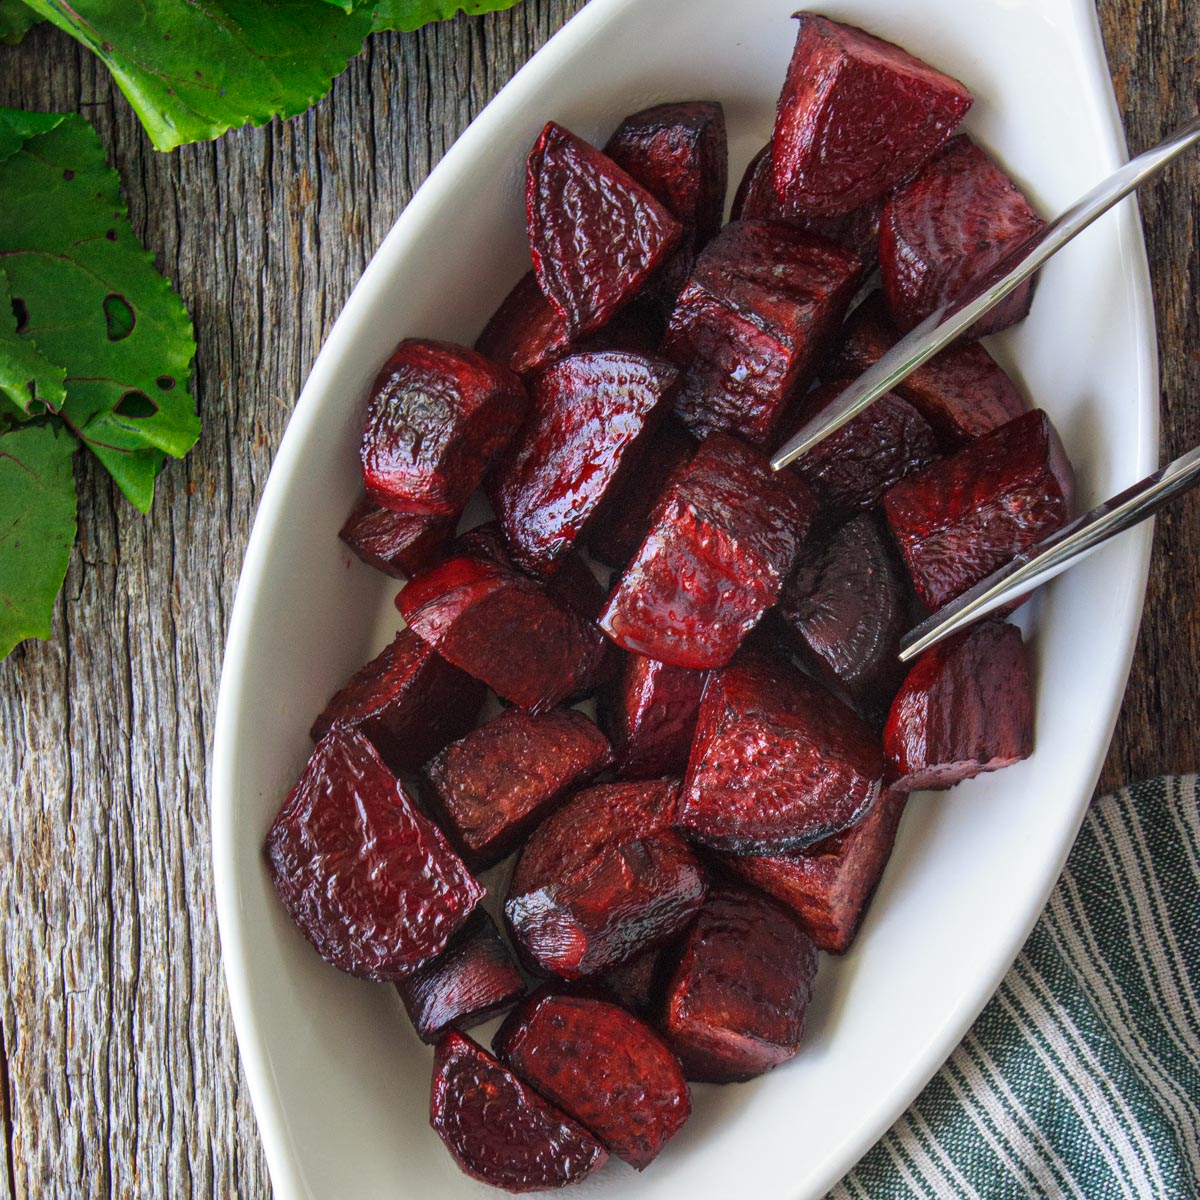 Simple Roasted Beets Recipe - Bowl of Roasted Beets